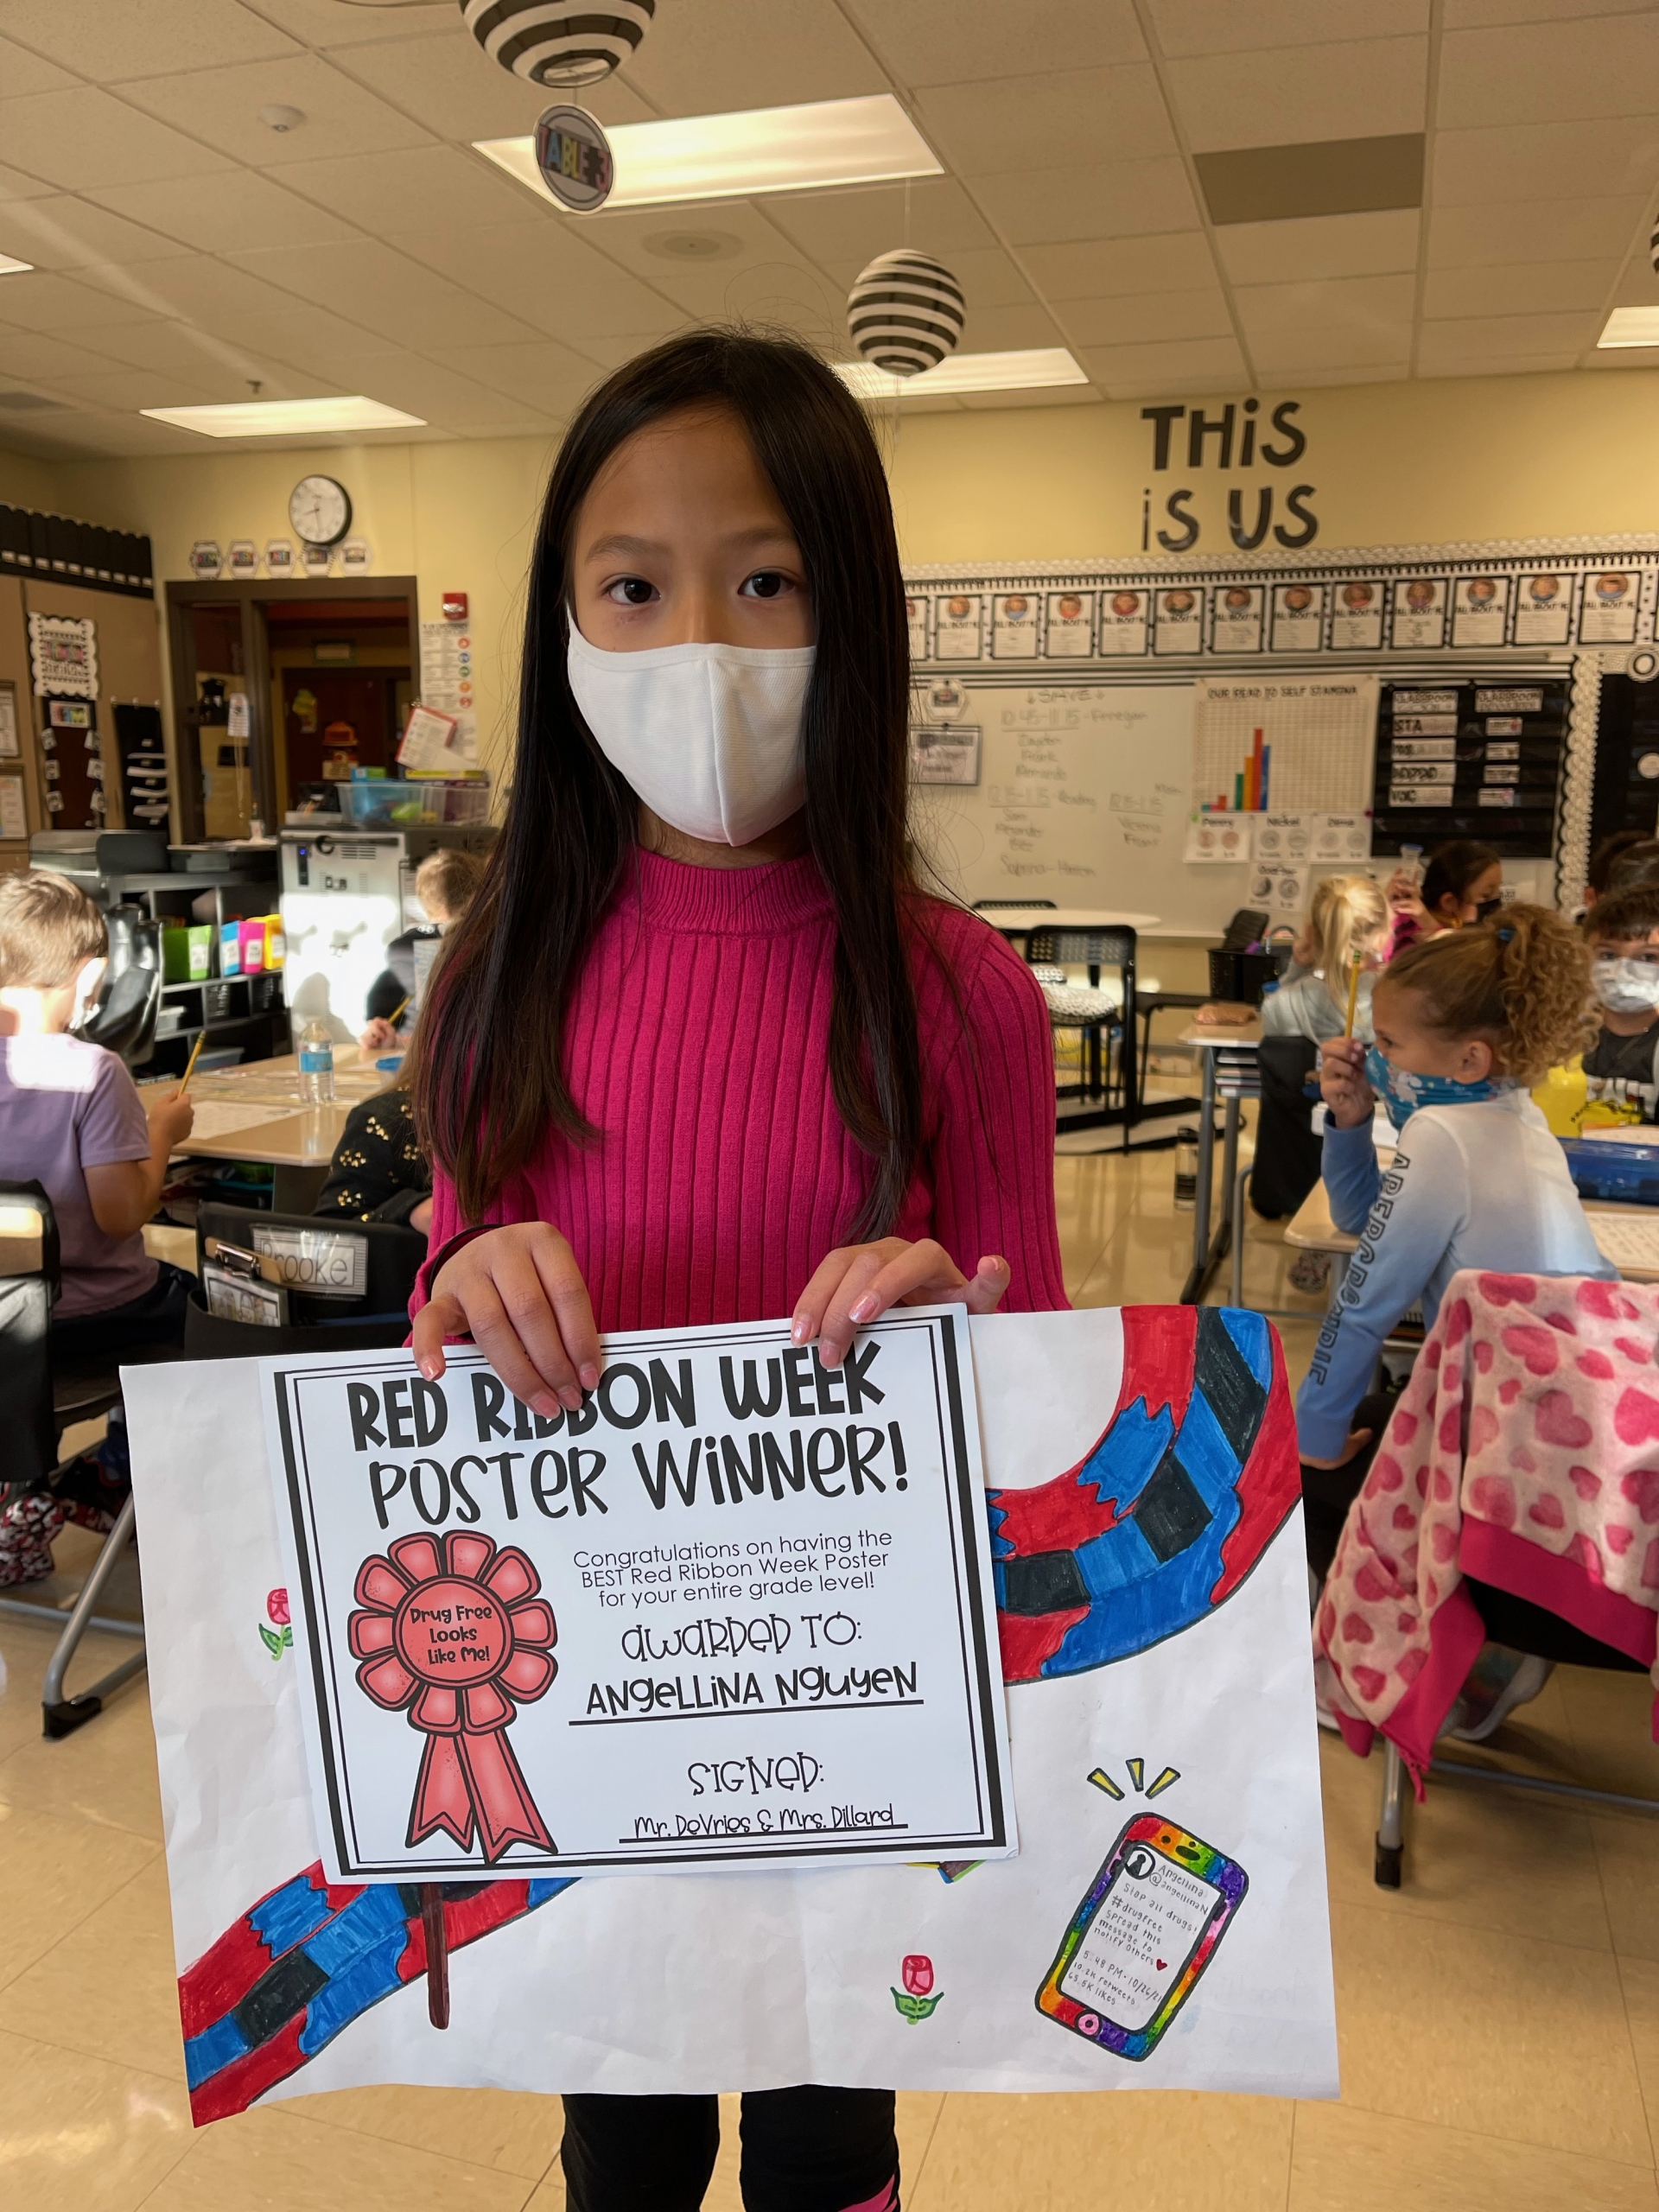 Congratulations to Protsman's Red Ribbon Poster contest winners!